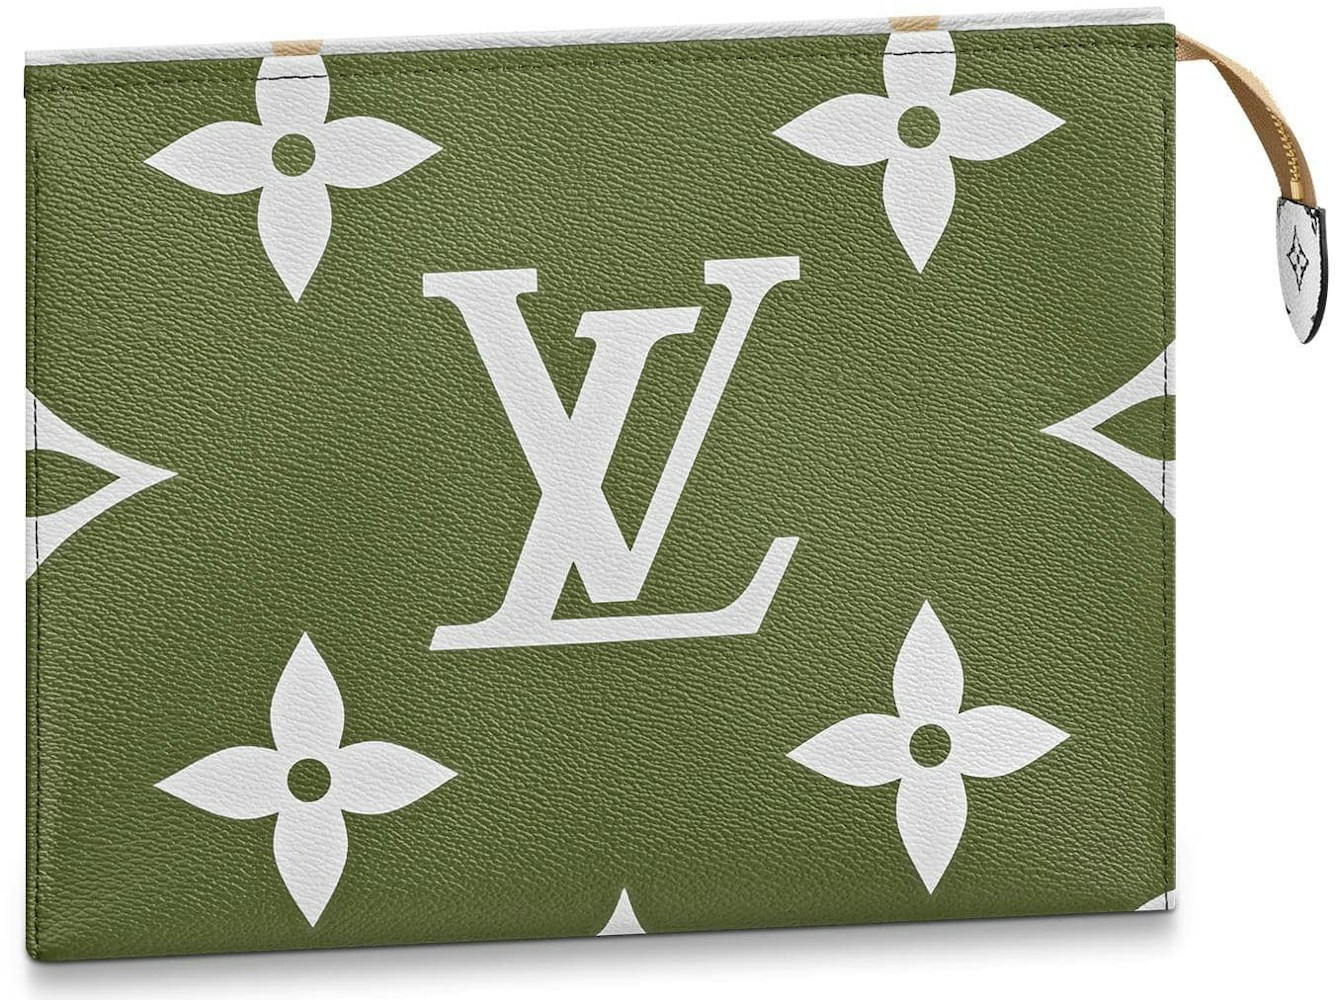 Louis Vuitton Pouch 26 Monogram Khaki in Coated Canvas with